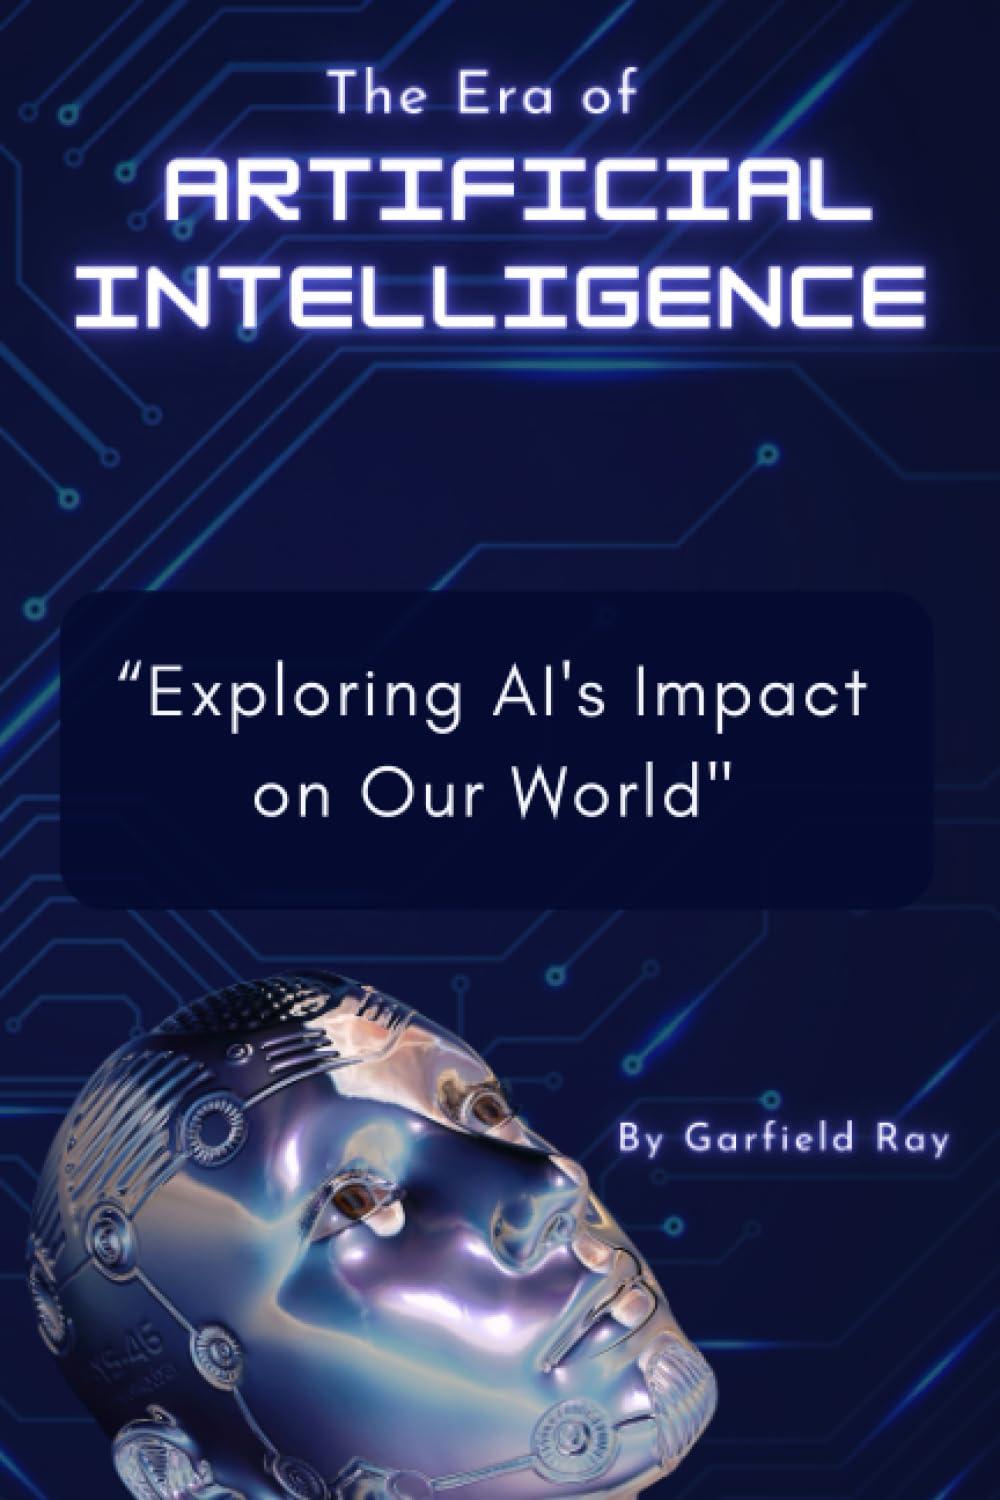 the era of artificial intelligence exploring ai's impact on our world 1st edition garfield ray b0cj49y5x2,